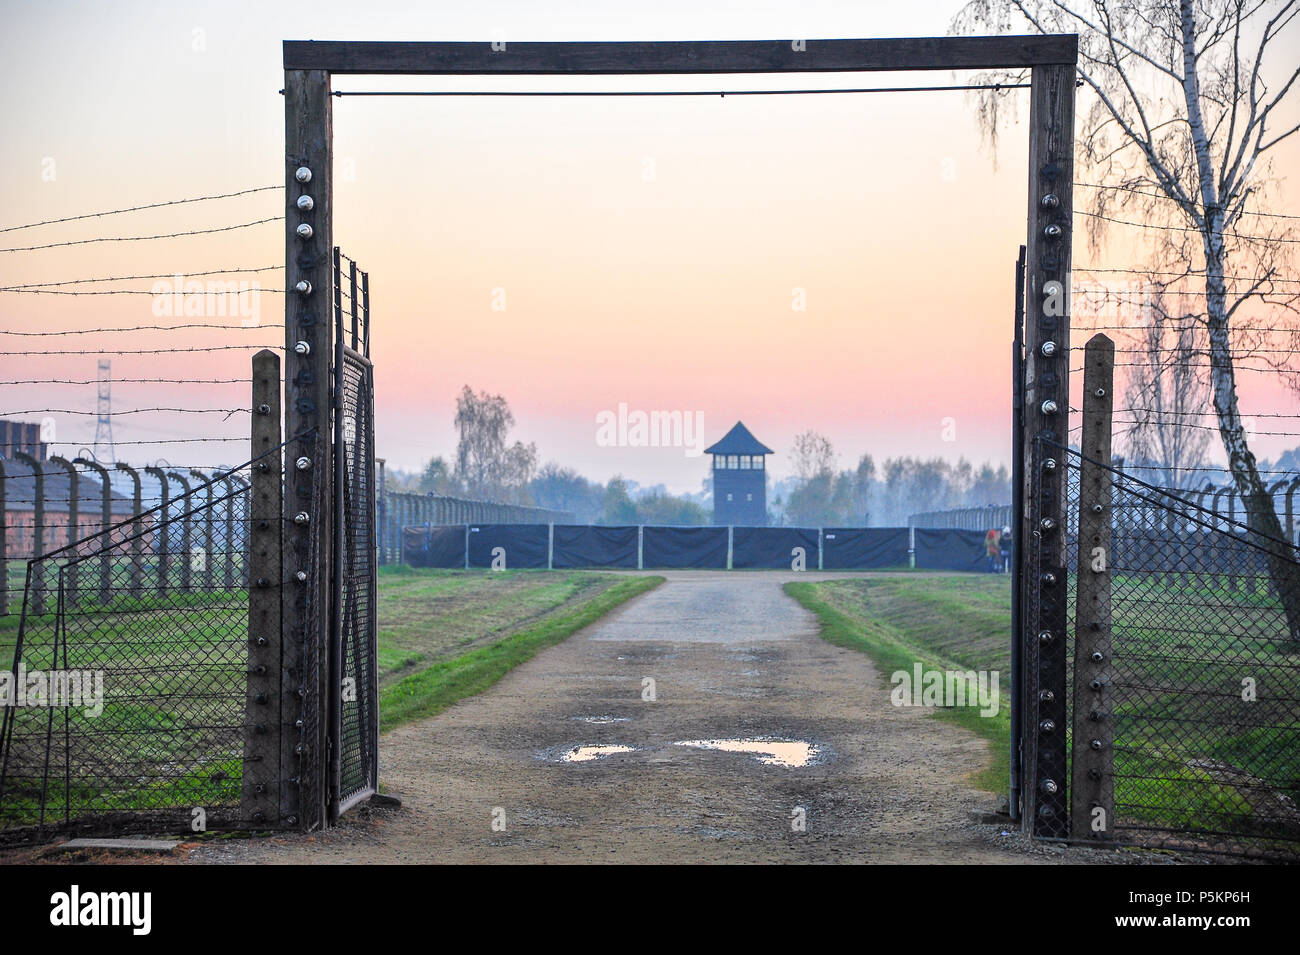 Sunset - Auschwitz:  Gate to Auschwitz-Birkenau concentration camp surrounded by barbed wire fences, guard tower and beautiful pink sky background Stock Photo